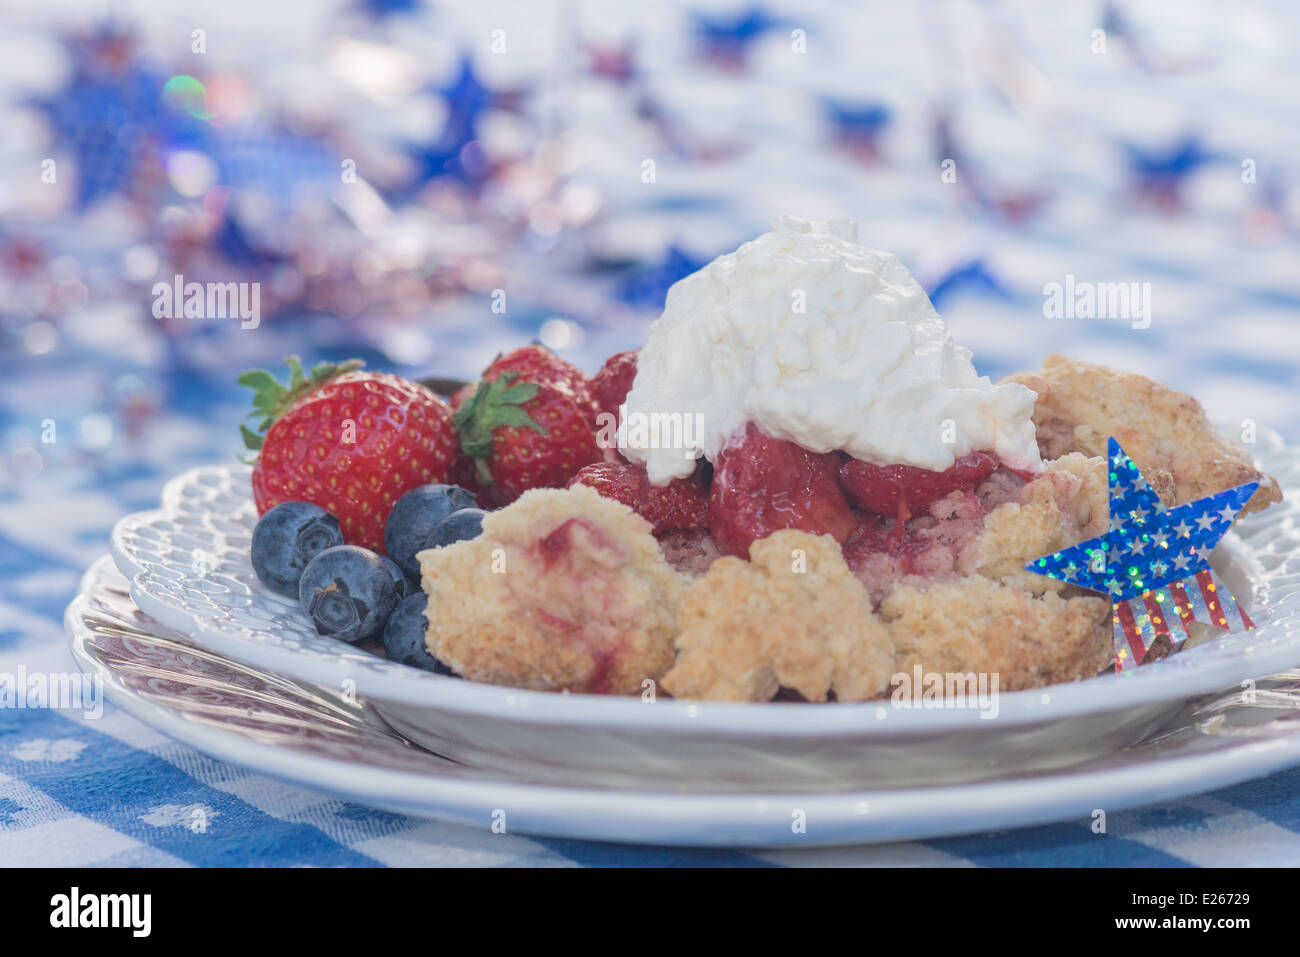 Shortcake with berries and stars and stripes decoration Stock Photo